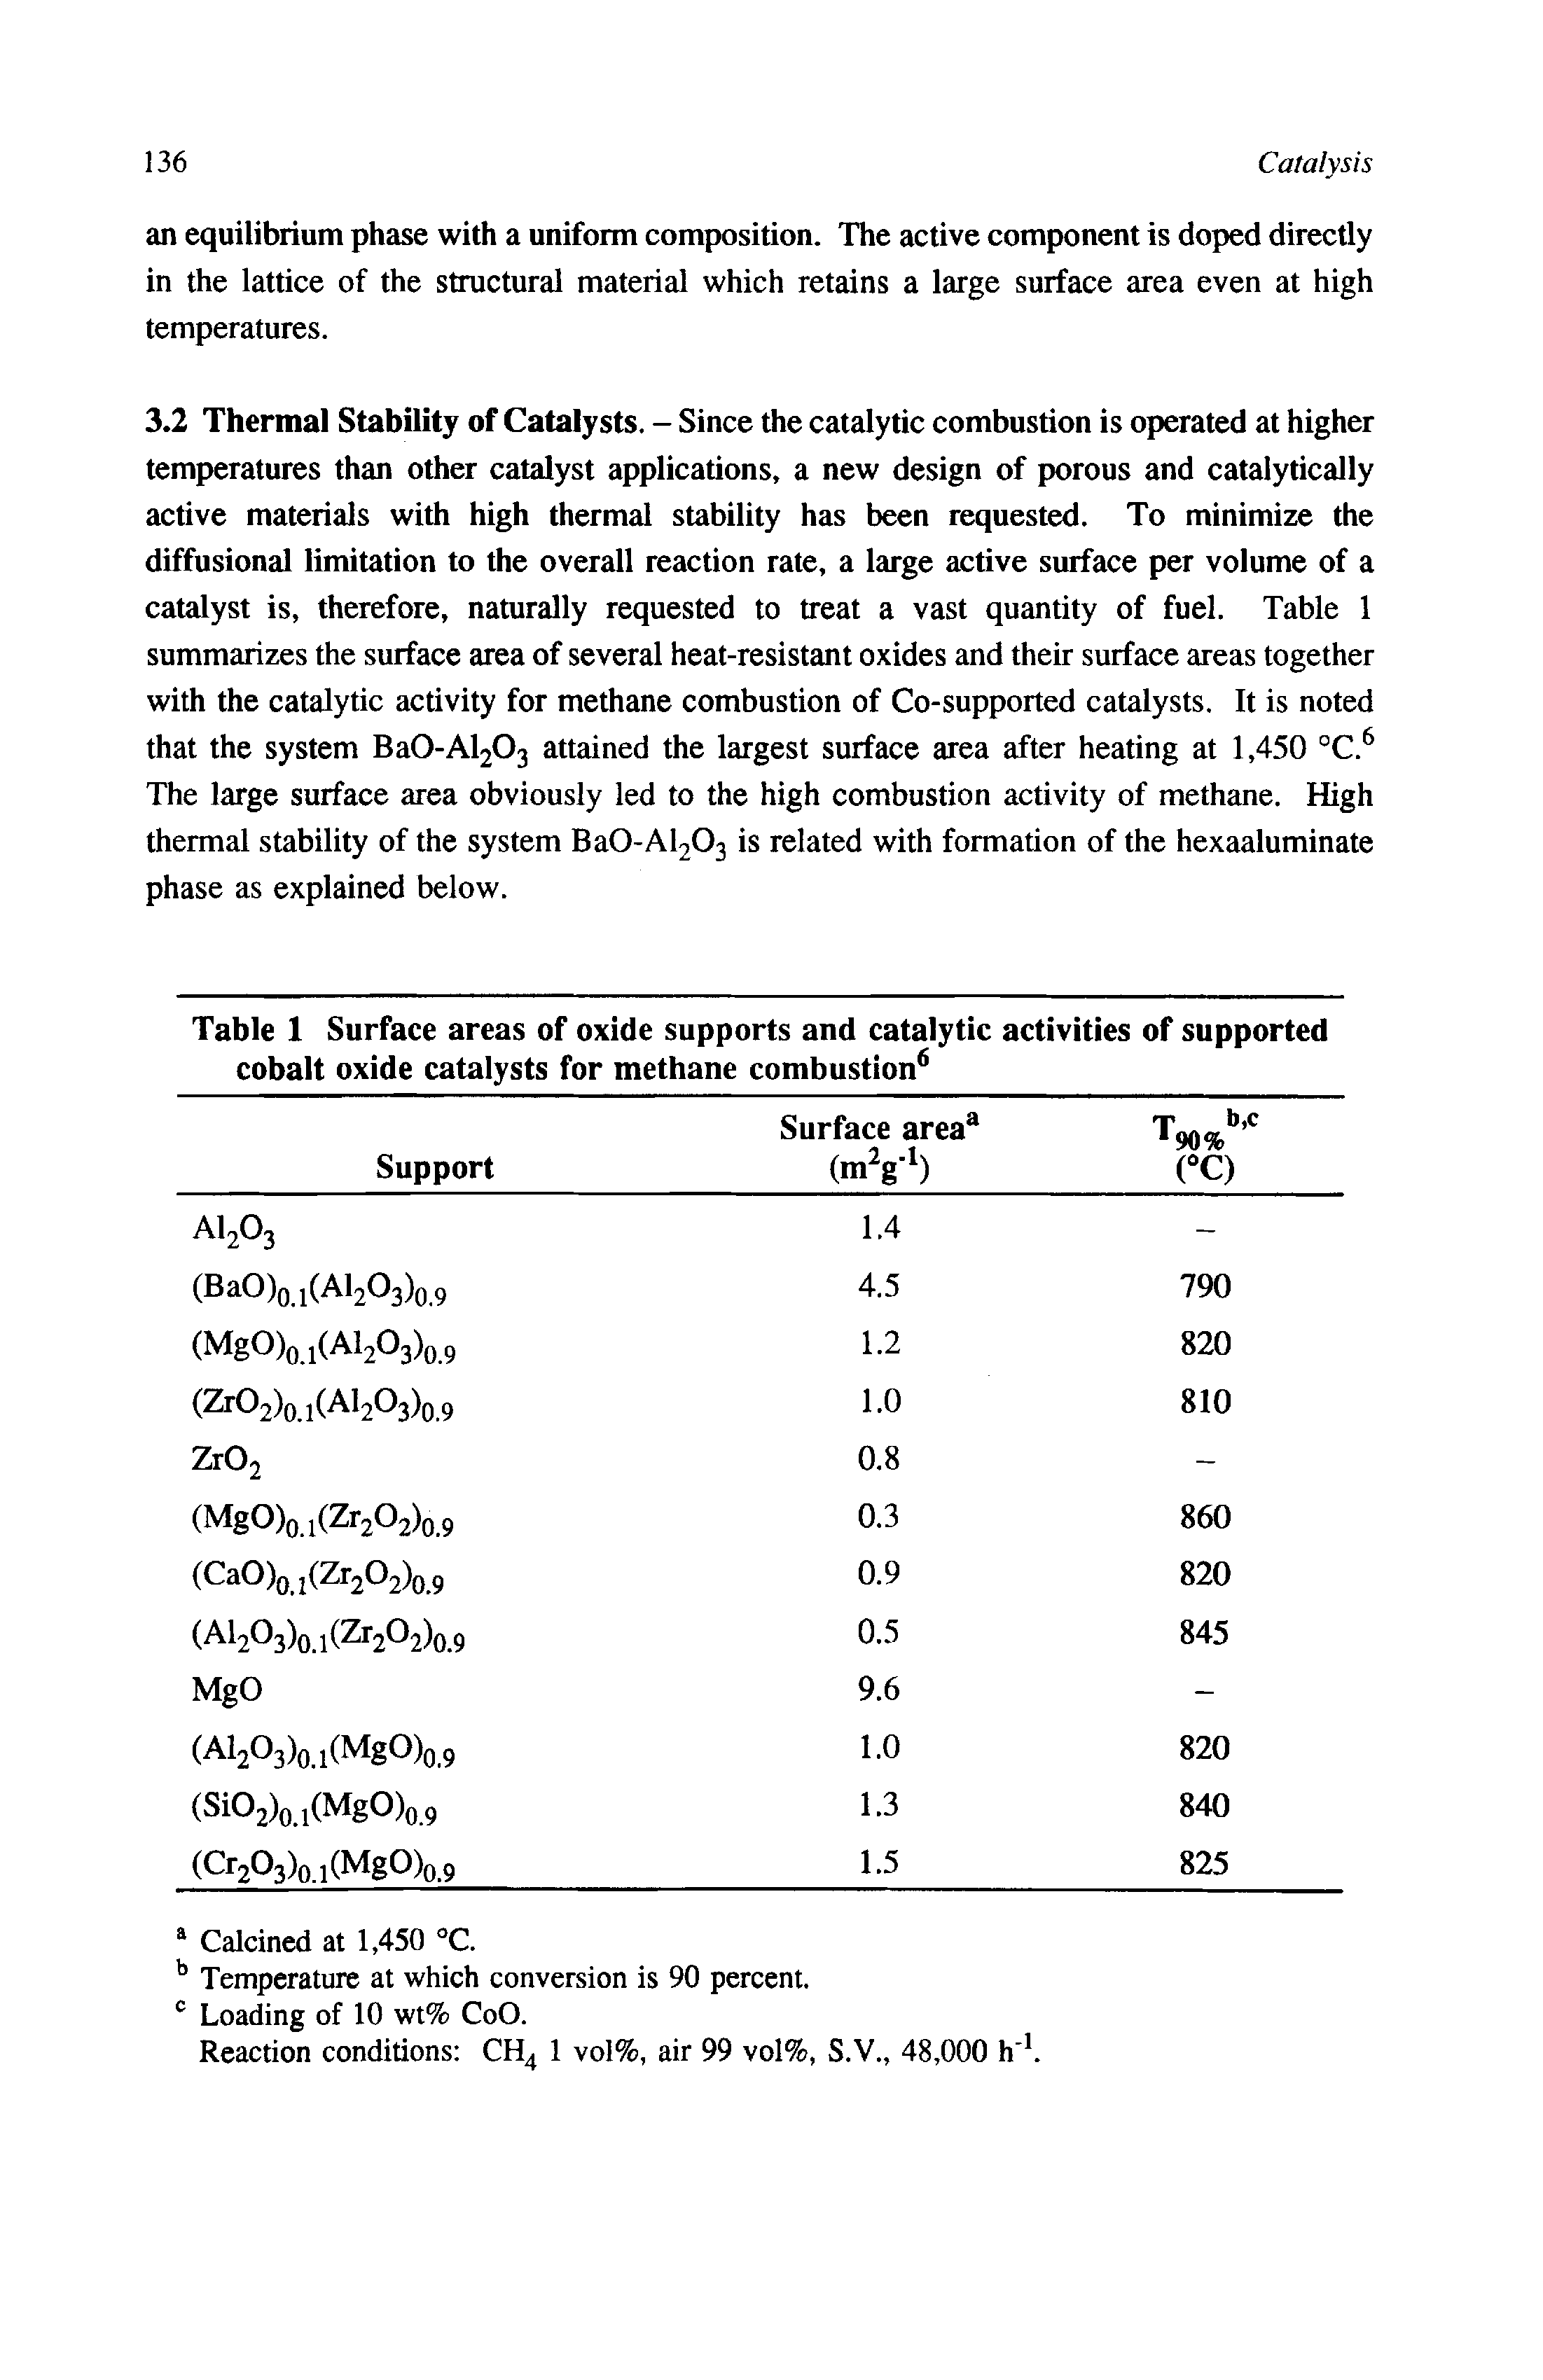 Table 1 Surface areas of oxide supports and catalytic activities of supported cobalt oxide catalysts for methane combustion ...